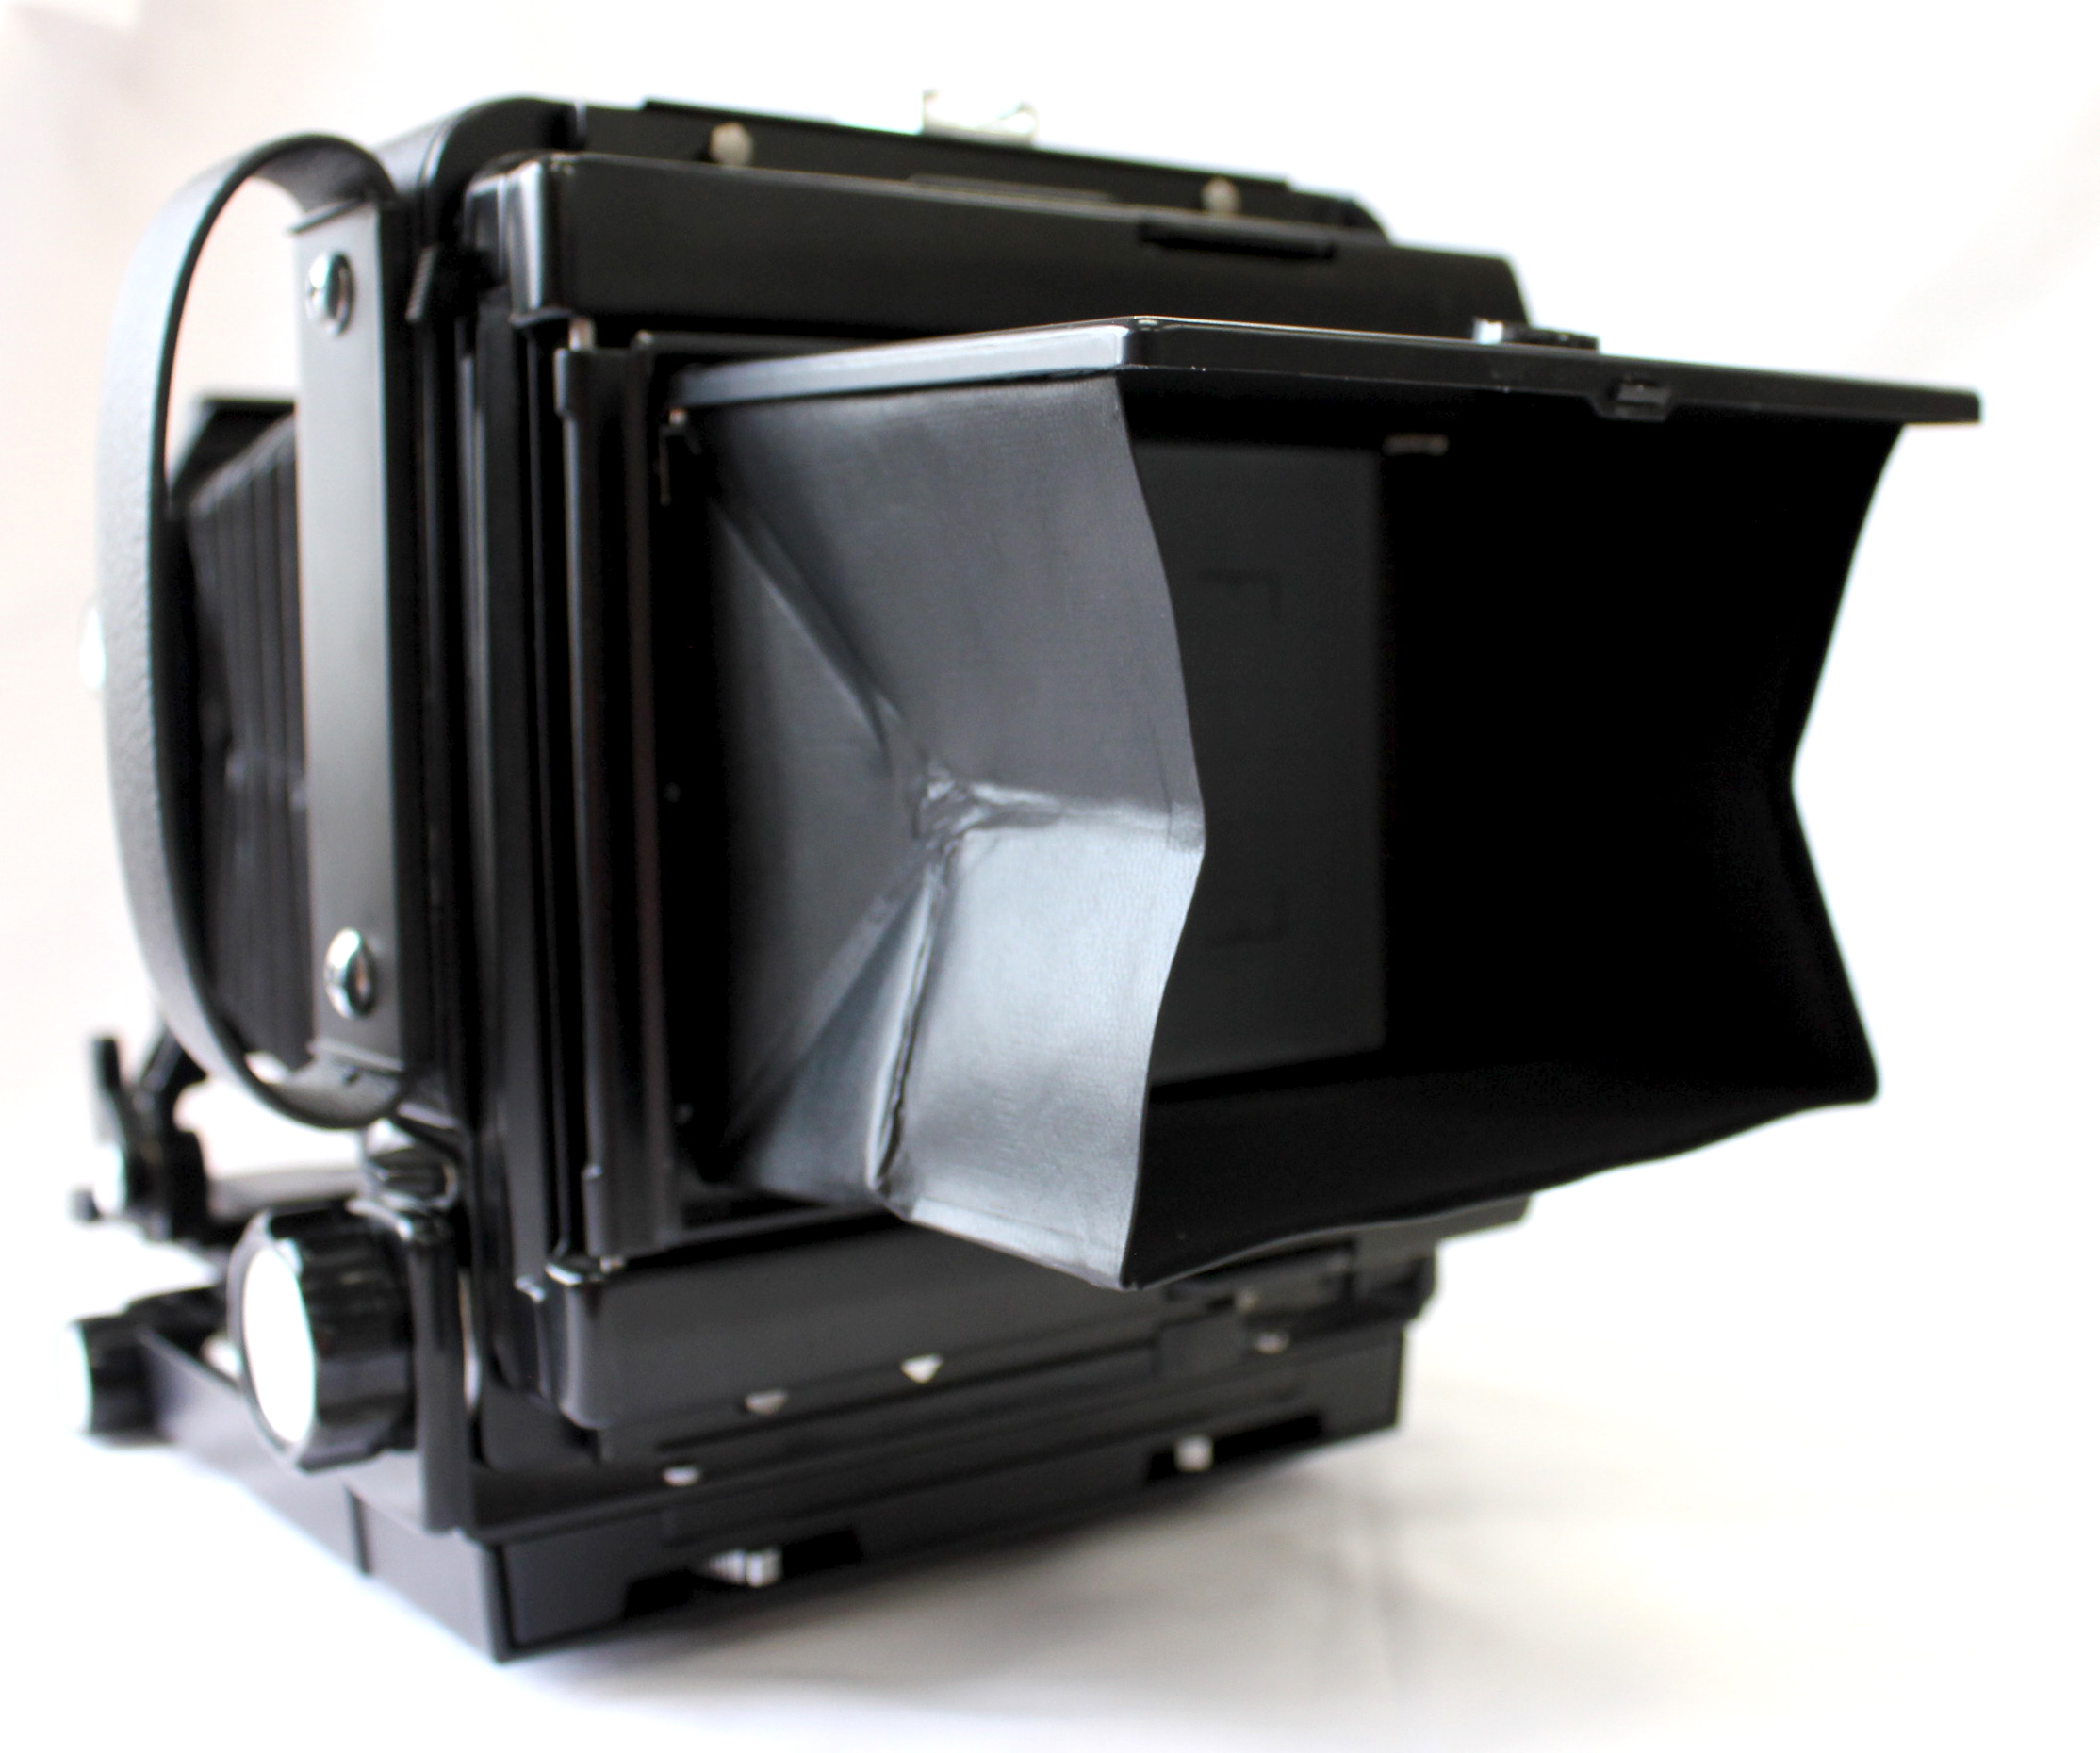  Toyo Field 45A 4x5 Large Format Film Camera with Revolving Back and 3 Cut Film Holders from Japan Photo 8